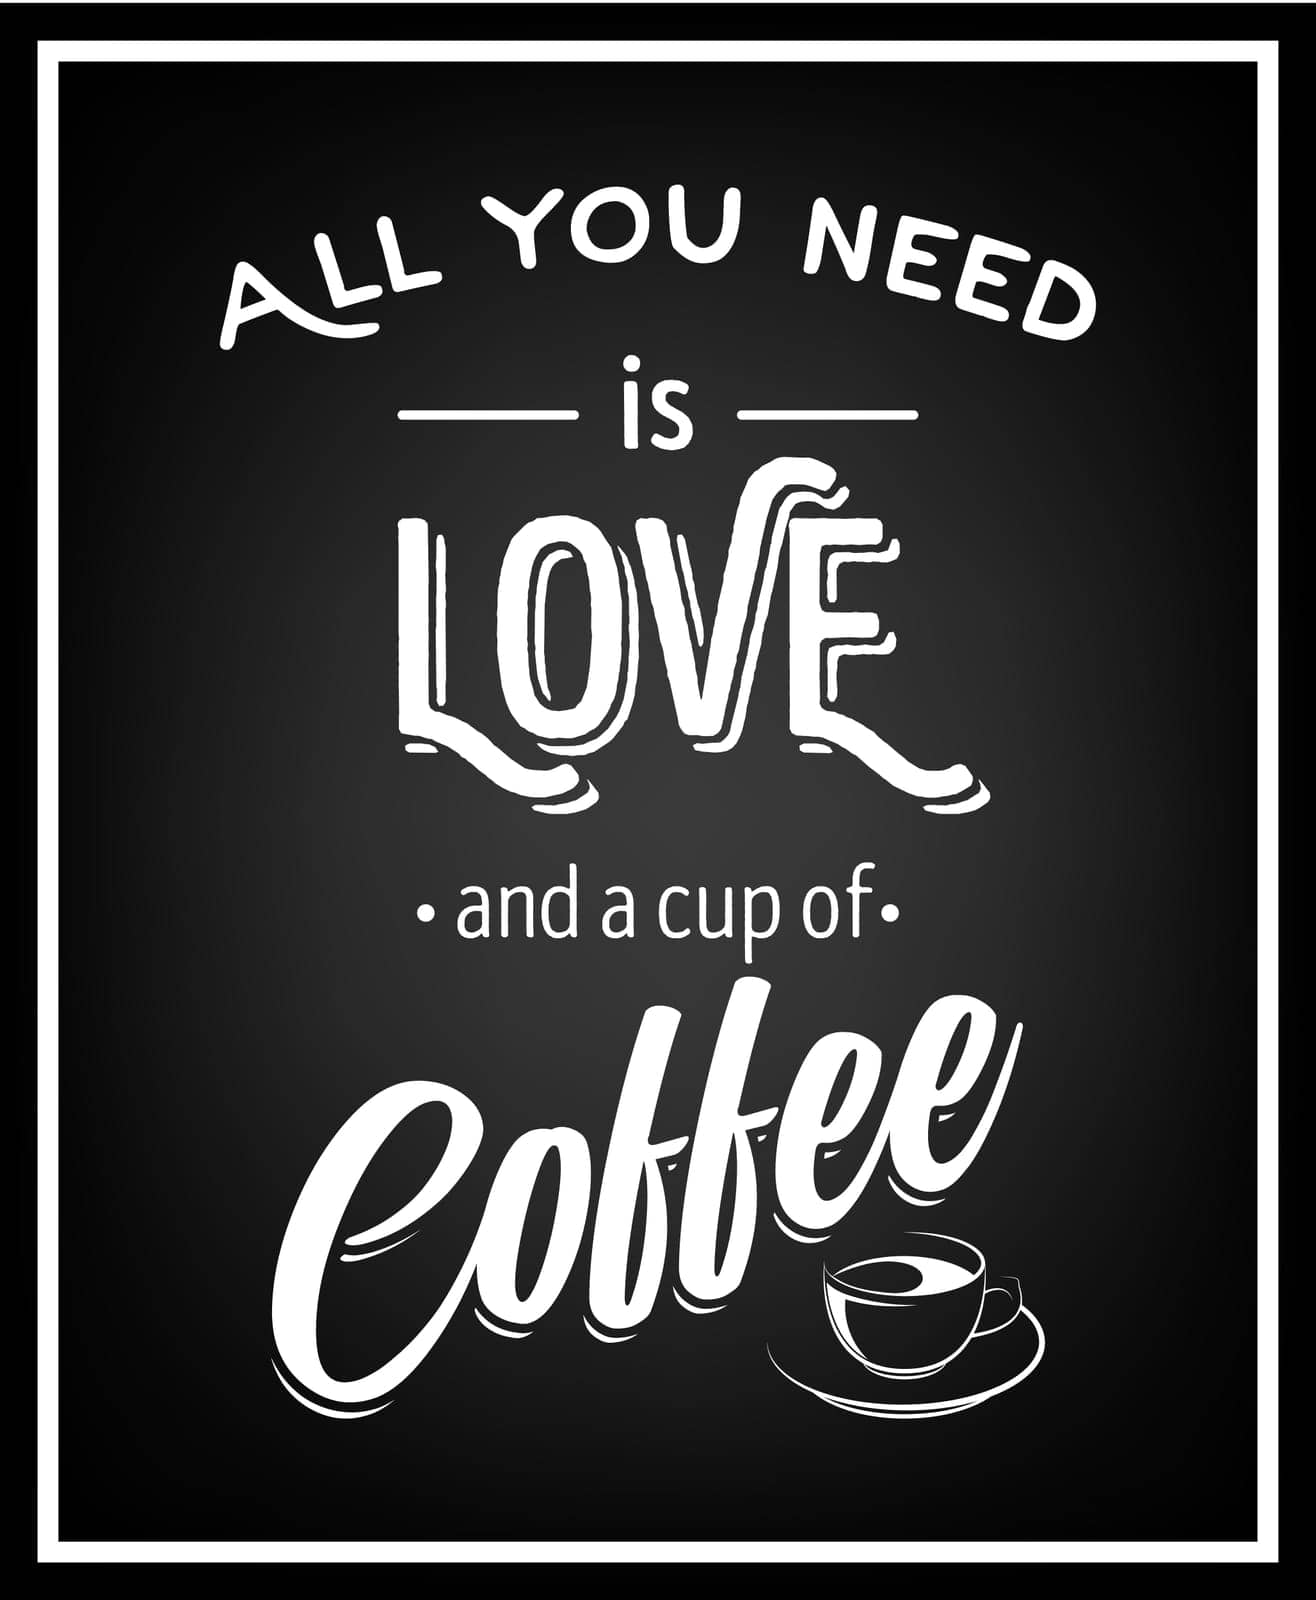 All you need is love and a cup of coffee - Quote Typographical Background. Vector EPS8 illustration.